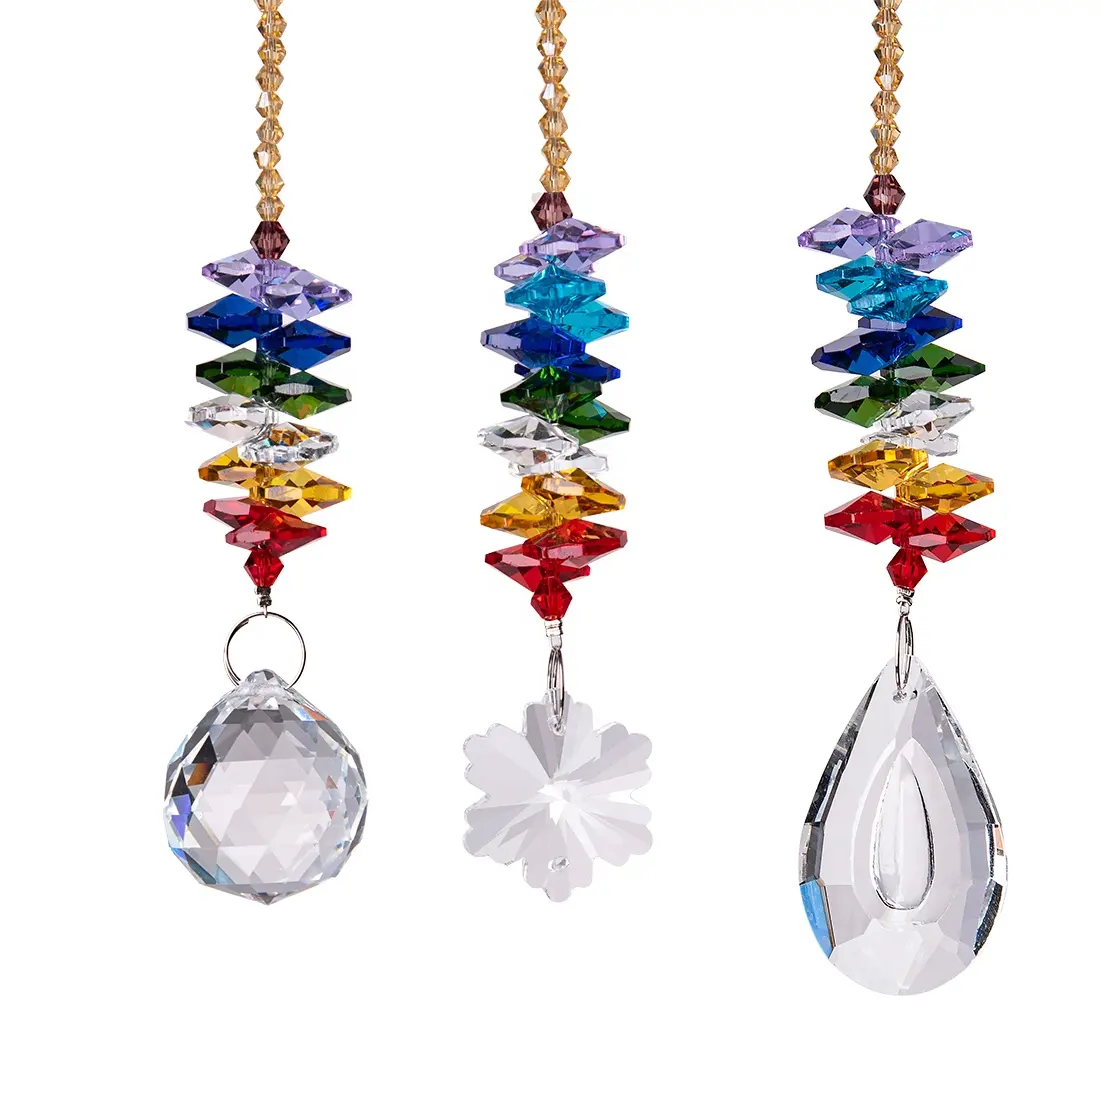 Colorful Crystals Pendants Chandelier Prisms Hanging Ornament Octogon Chakra for Home Office Garden Decoration